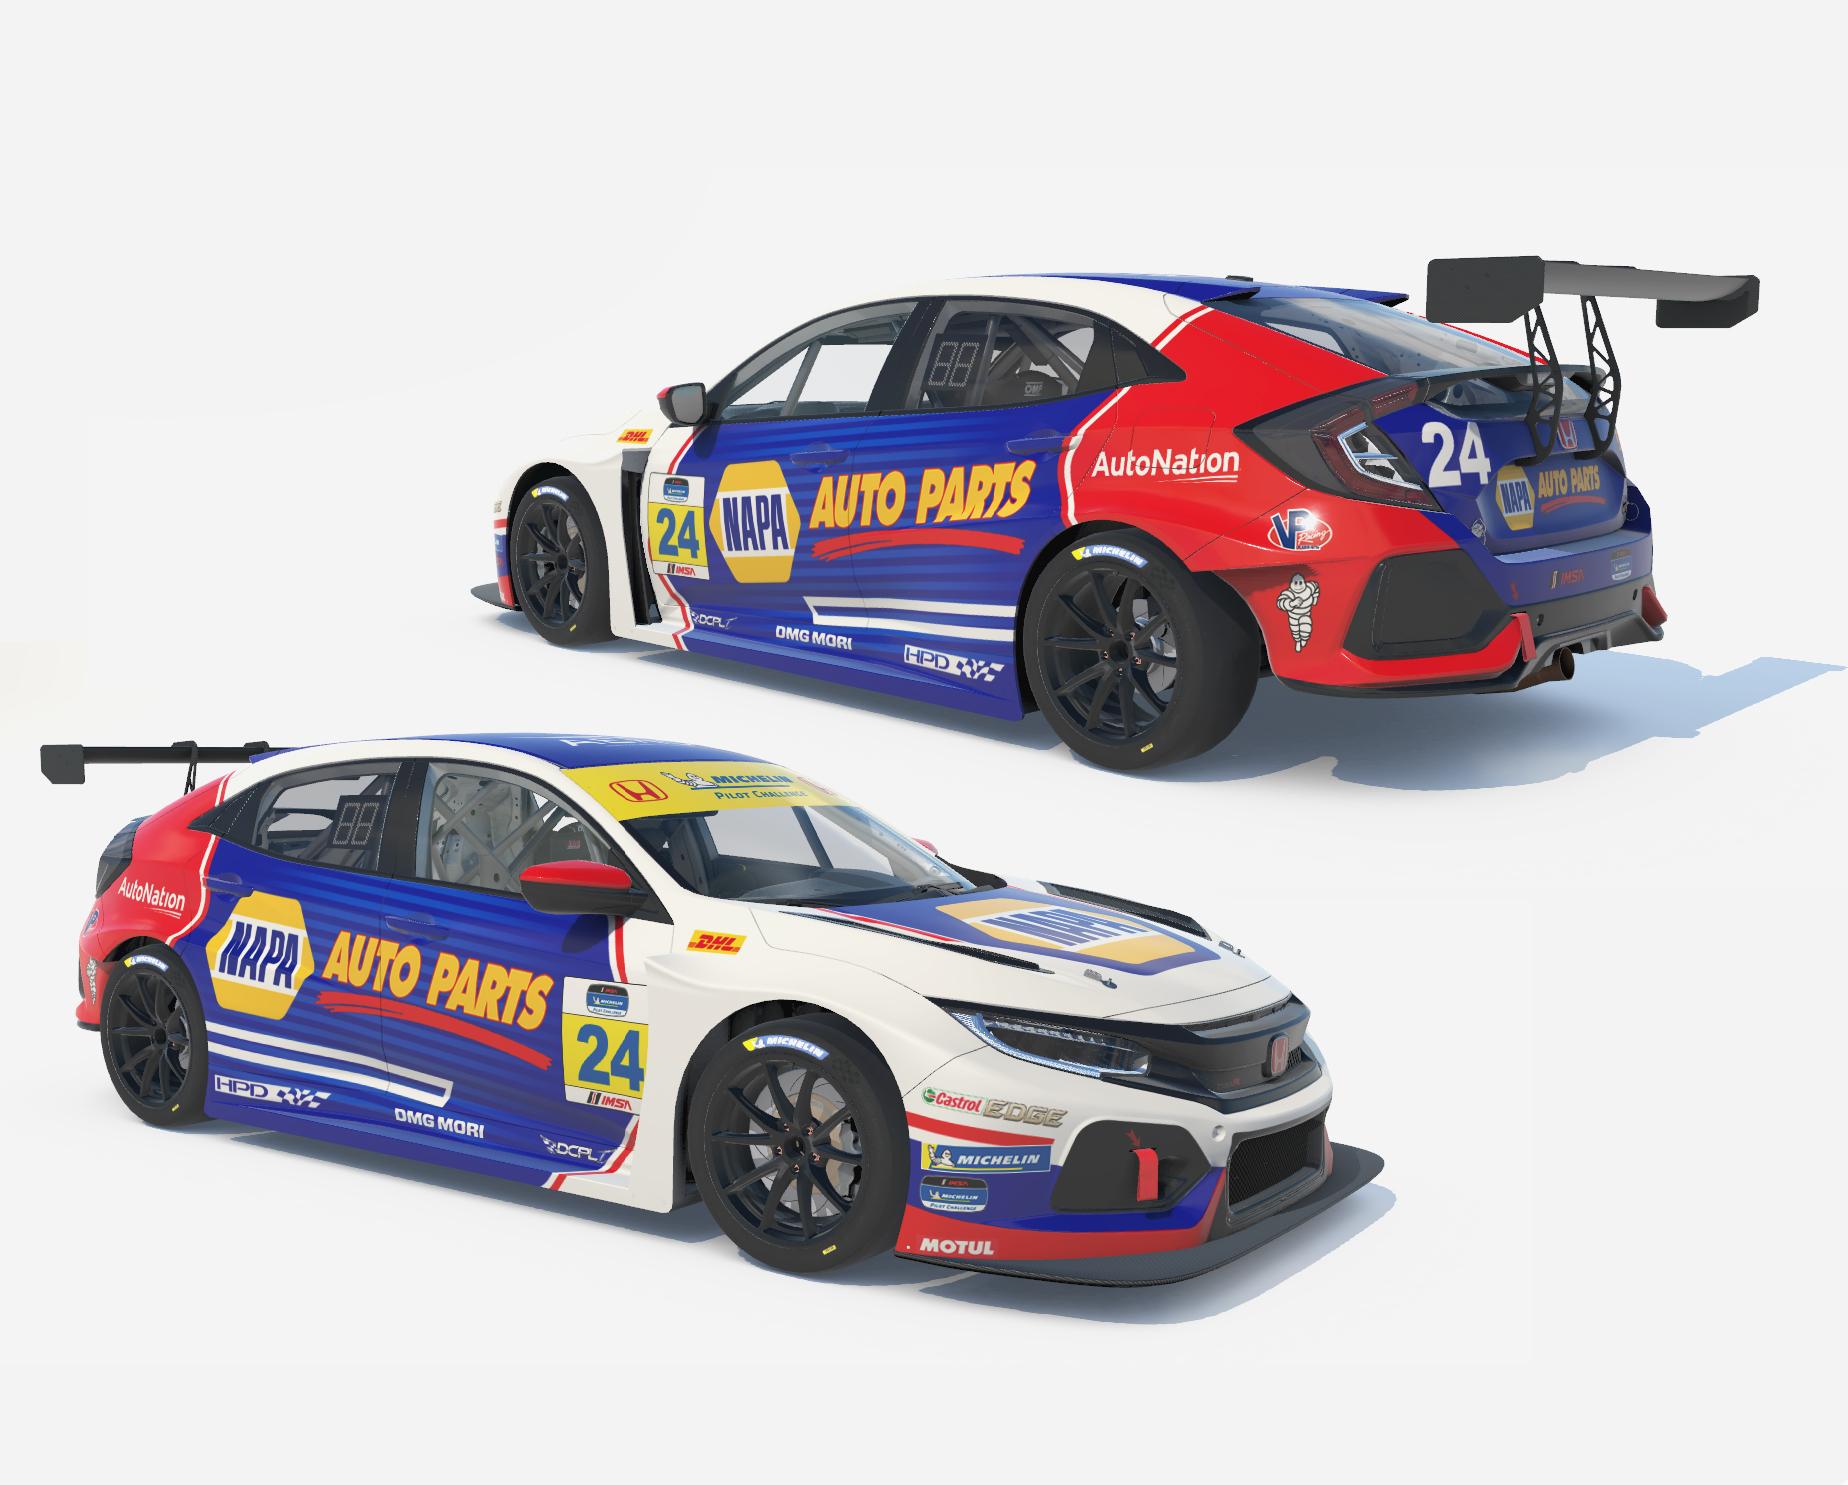 Preview of NAPA Civic TCR by Sean Disbro2